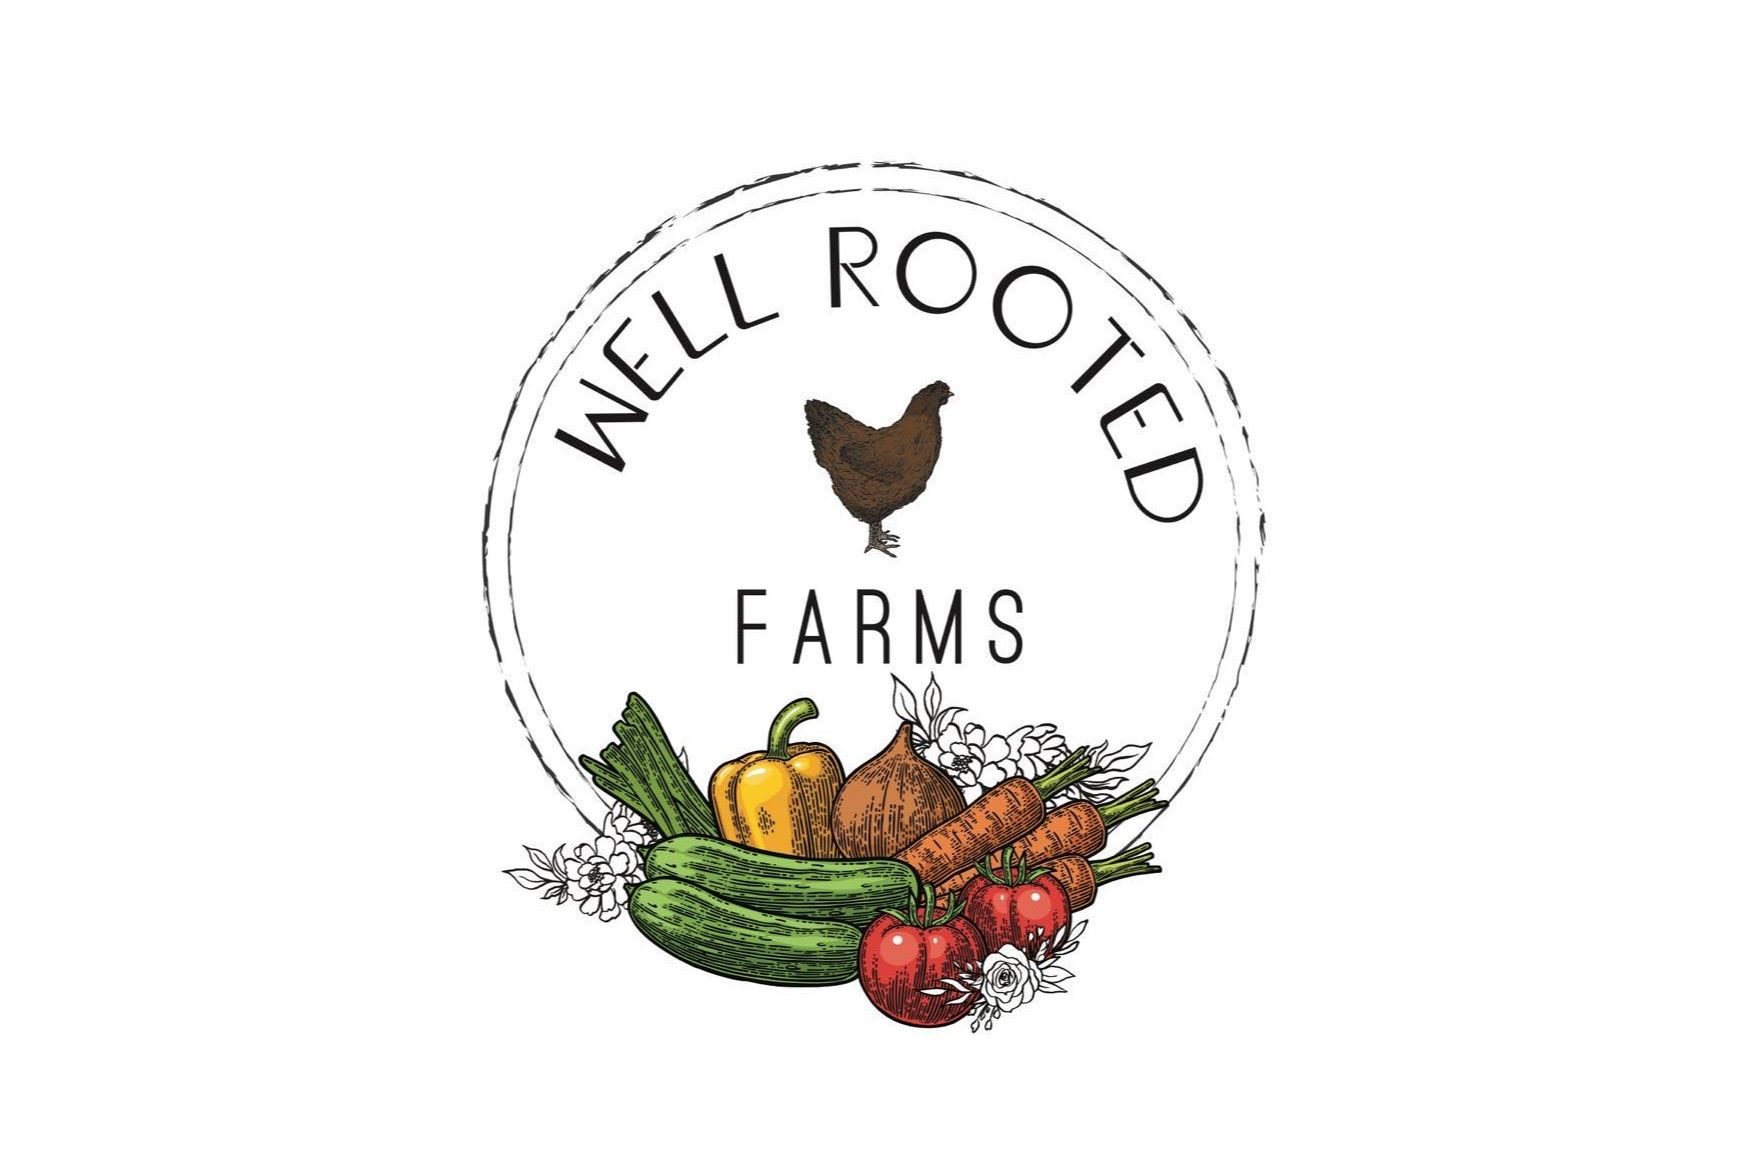 High-quality and Nutritious Food - Well Rooted Farms